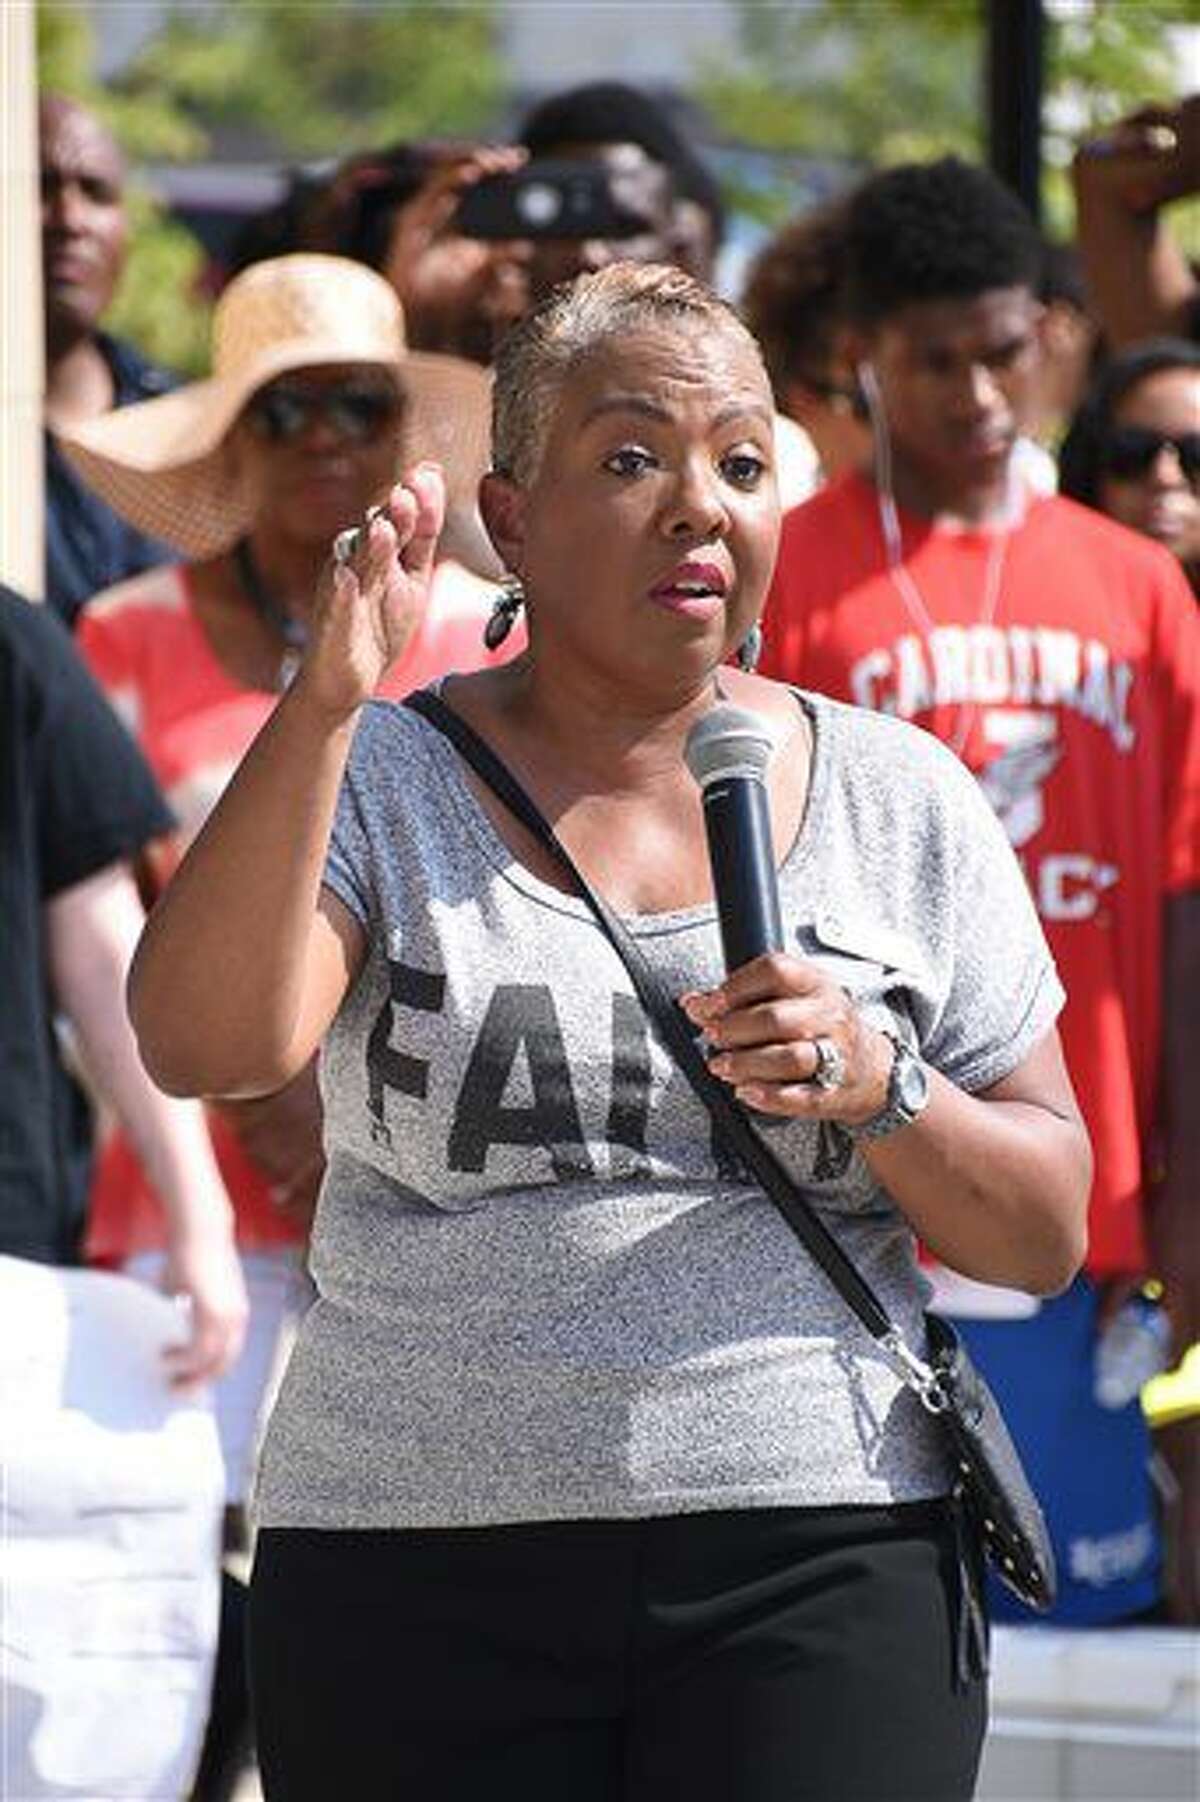 JDNDoRightProtest03 Onslow County Commissioner Million Heir-Williams speaks at the Do the Right Thing protest held in downtown Jacksonville, N.C., Saturday, July 9, 2016. (Elizabeth Horn/The Daily News via AP)